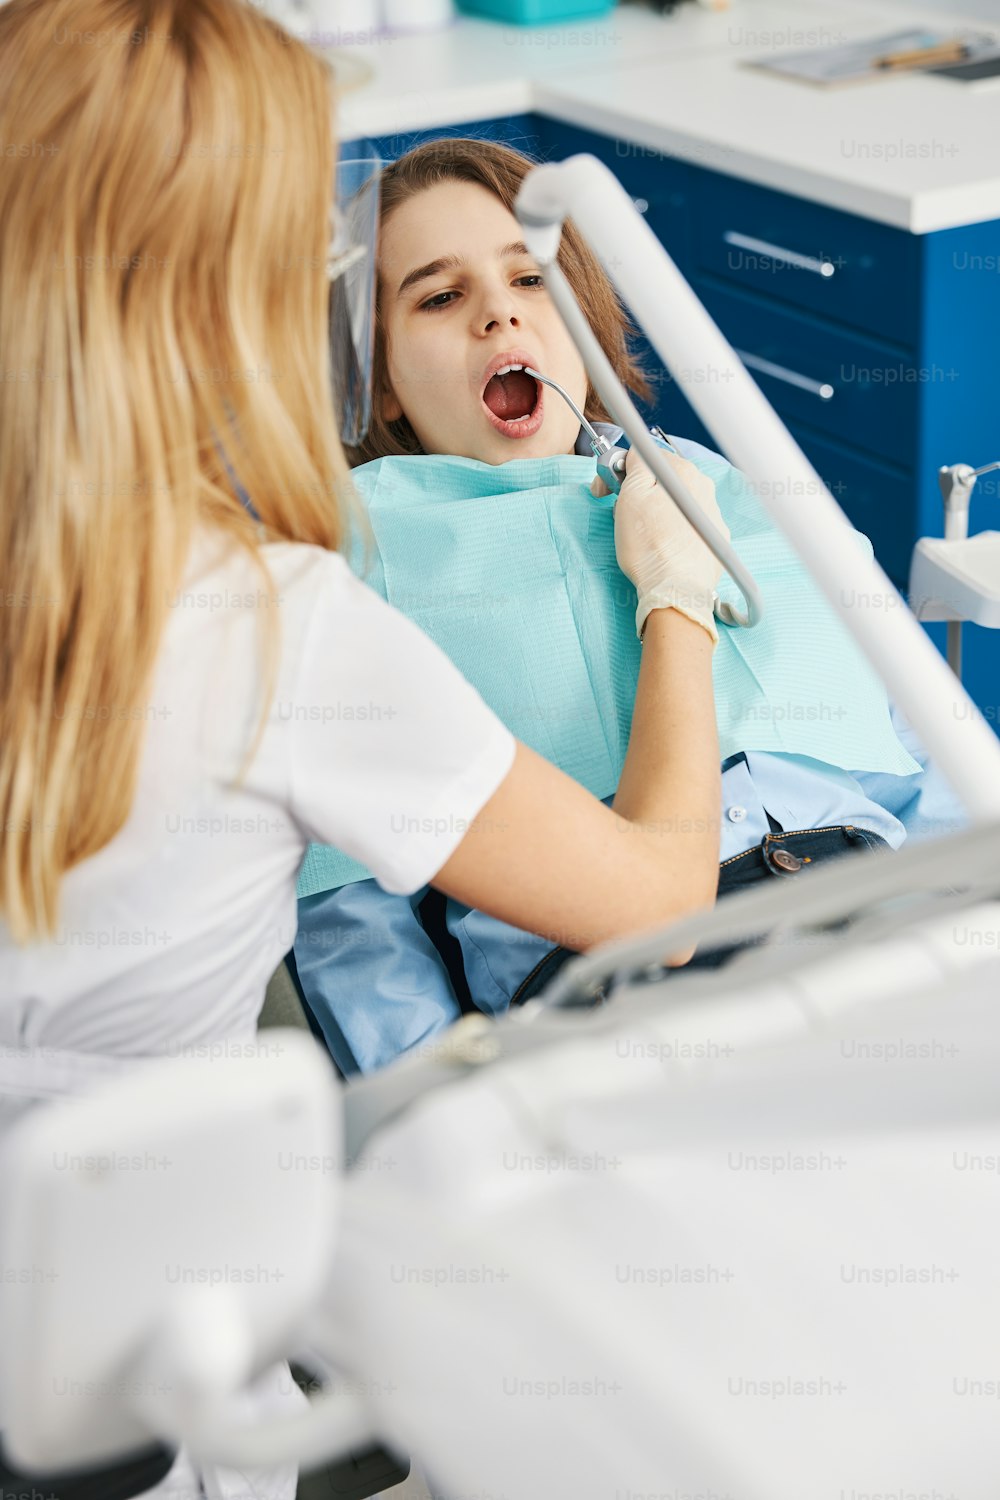 Stomatologist in facial shield spraying teeth in opened mouth of a kid with dental pneumatic spray gun